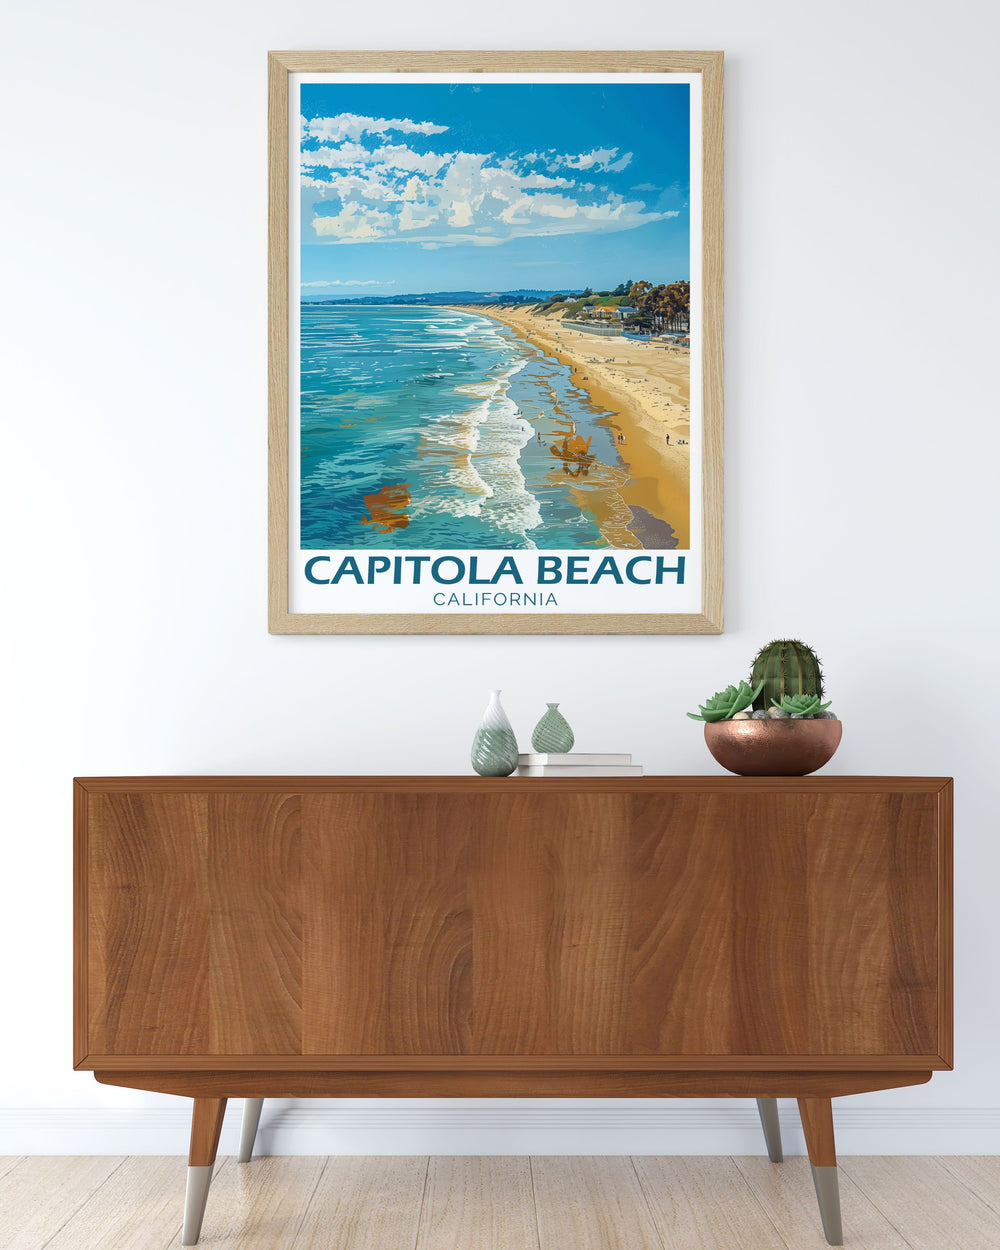 Beautiful Capitola Beach Art featuring a detailed depiction of the beach scene ideal for creating a relaxing atmosphere in your home a wonderful addition to California wall decor and a thoughtful gift for any occasion